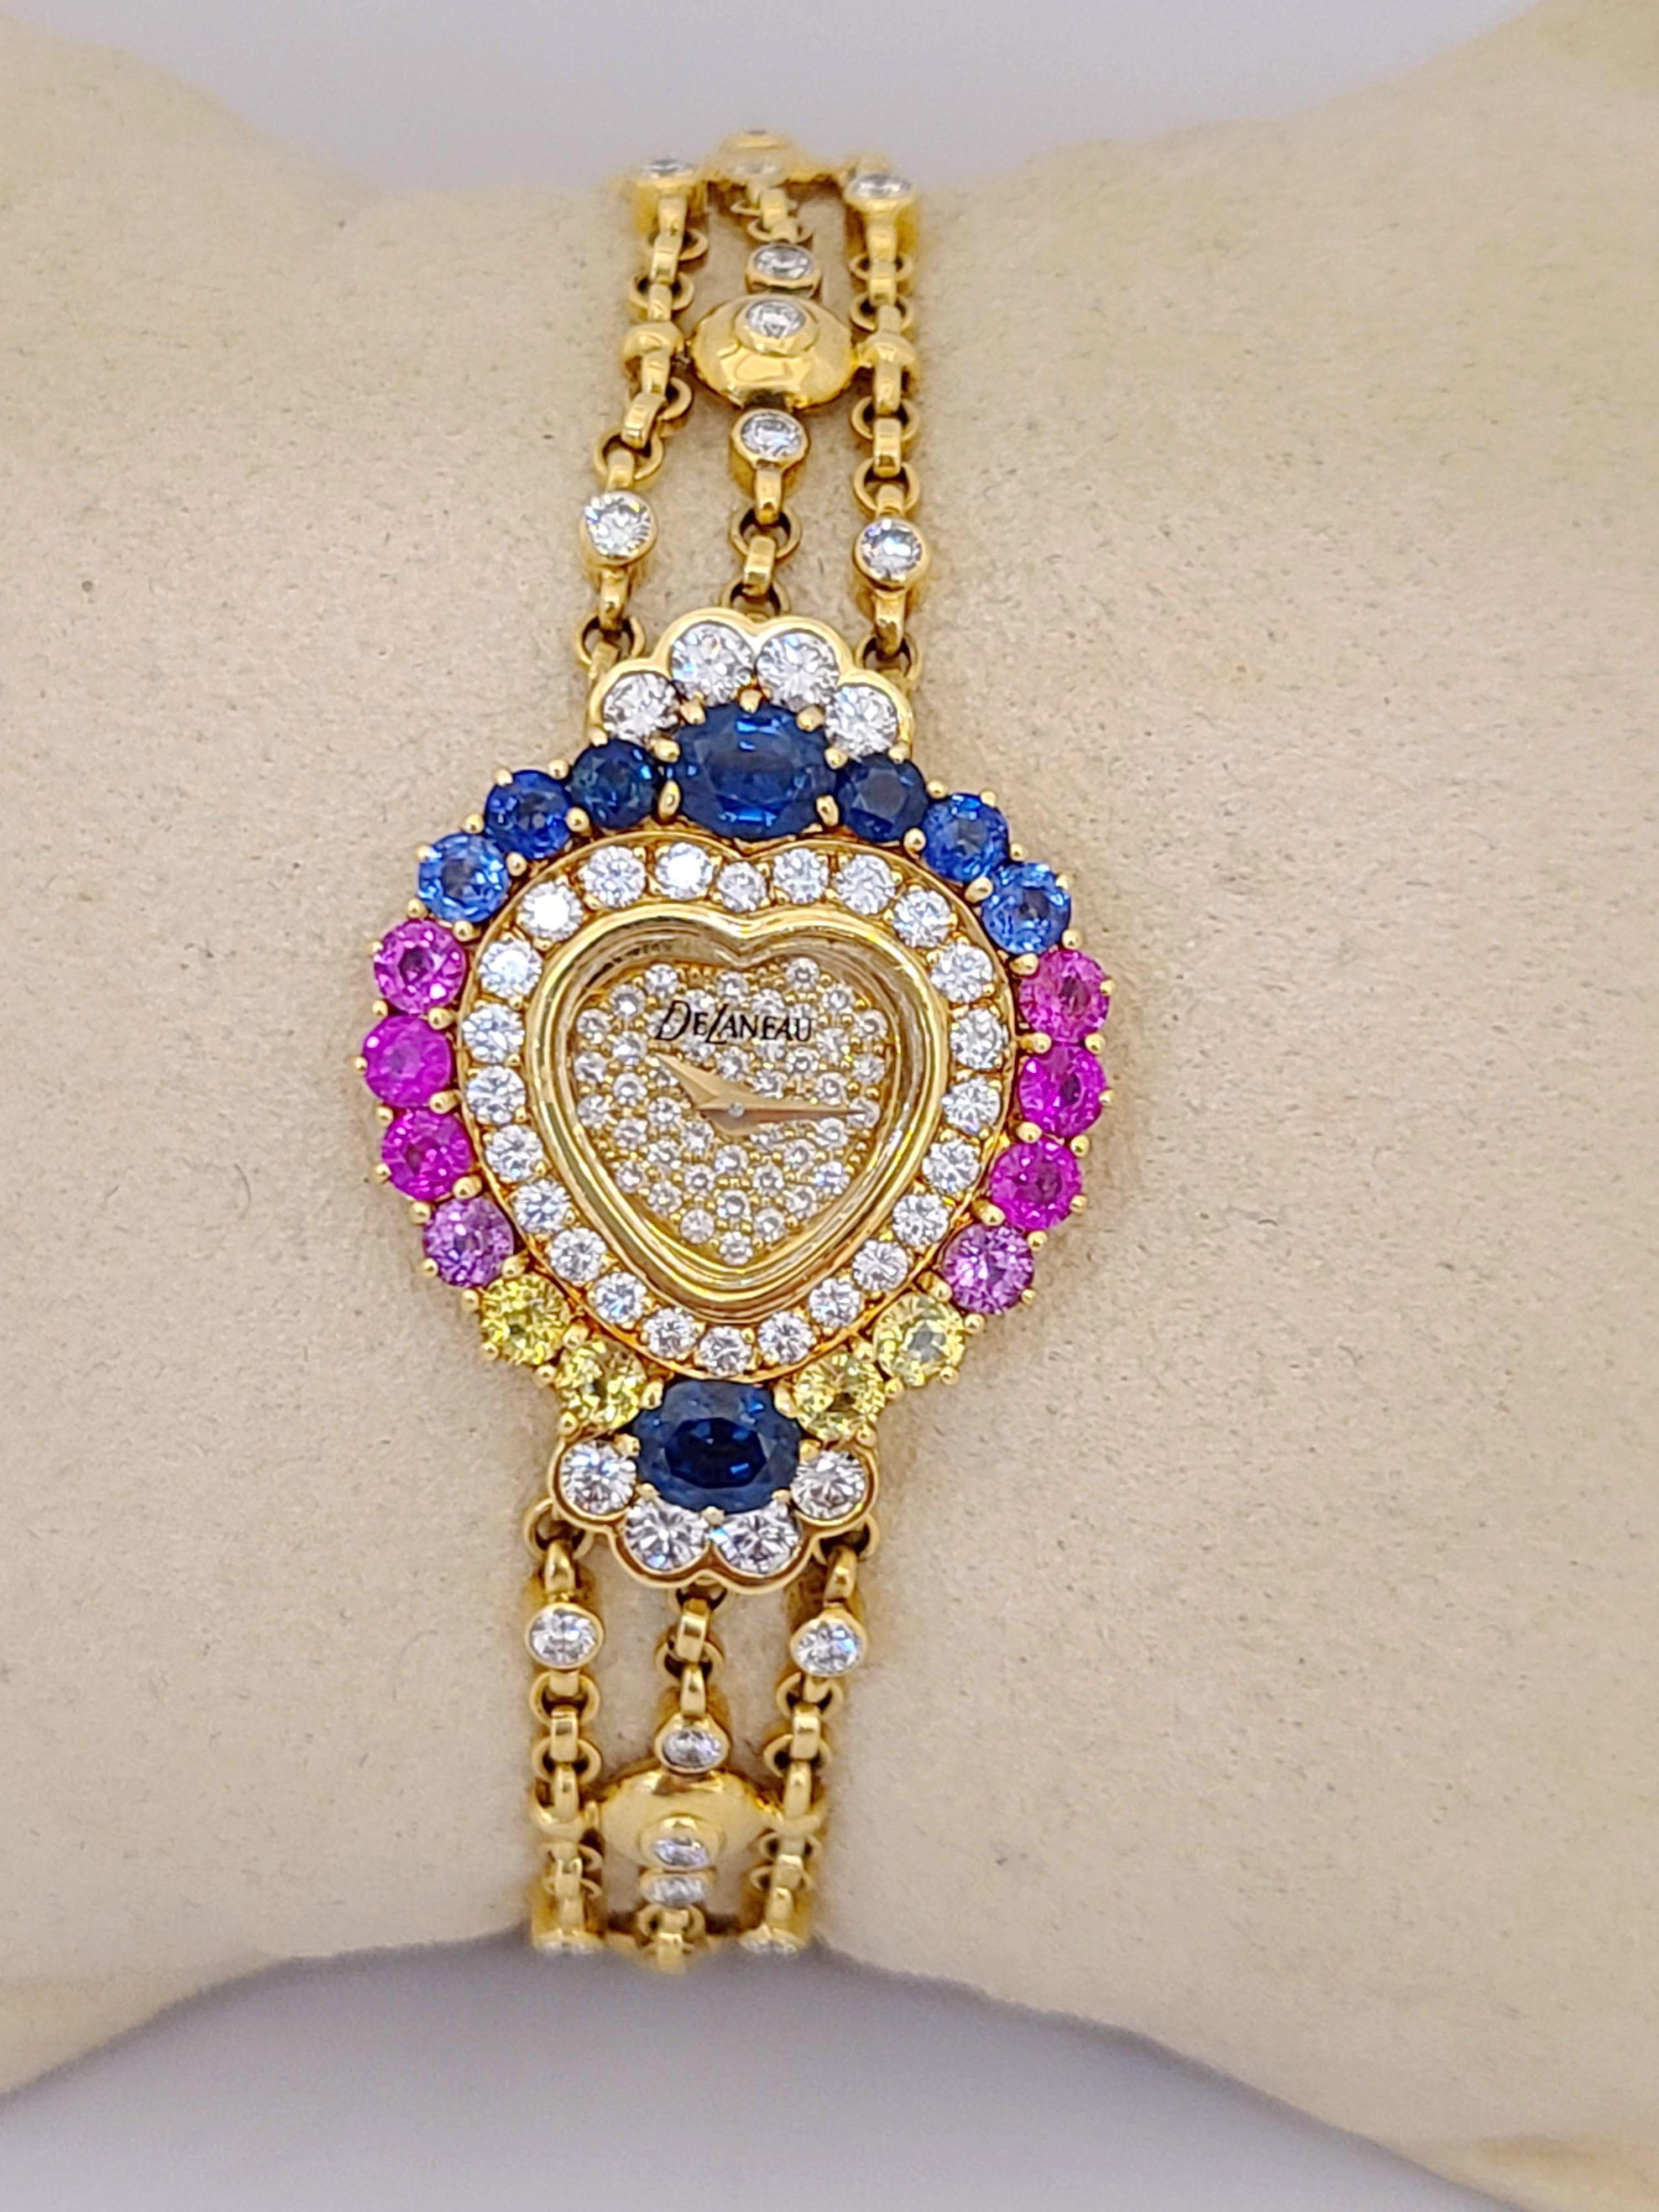 Round Cut DeLaneau 18 Karat Gold Diamond and Multicolored Sapphires Heart Shaped Watch For Sale